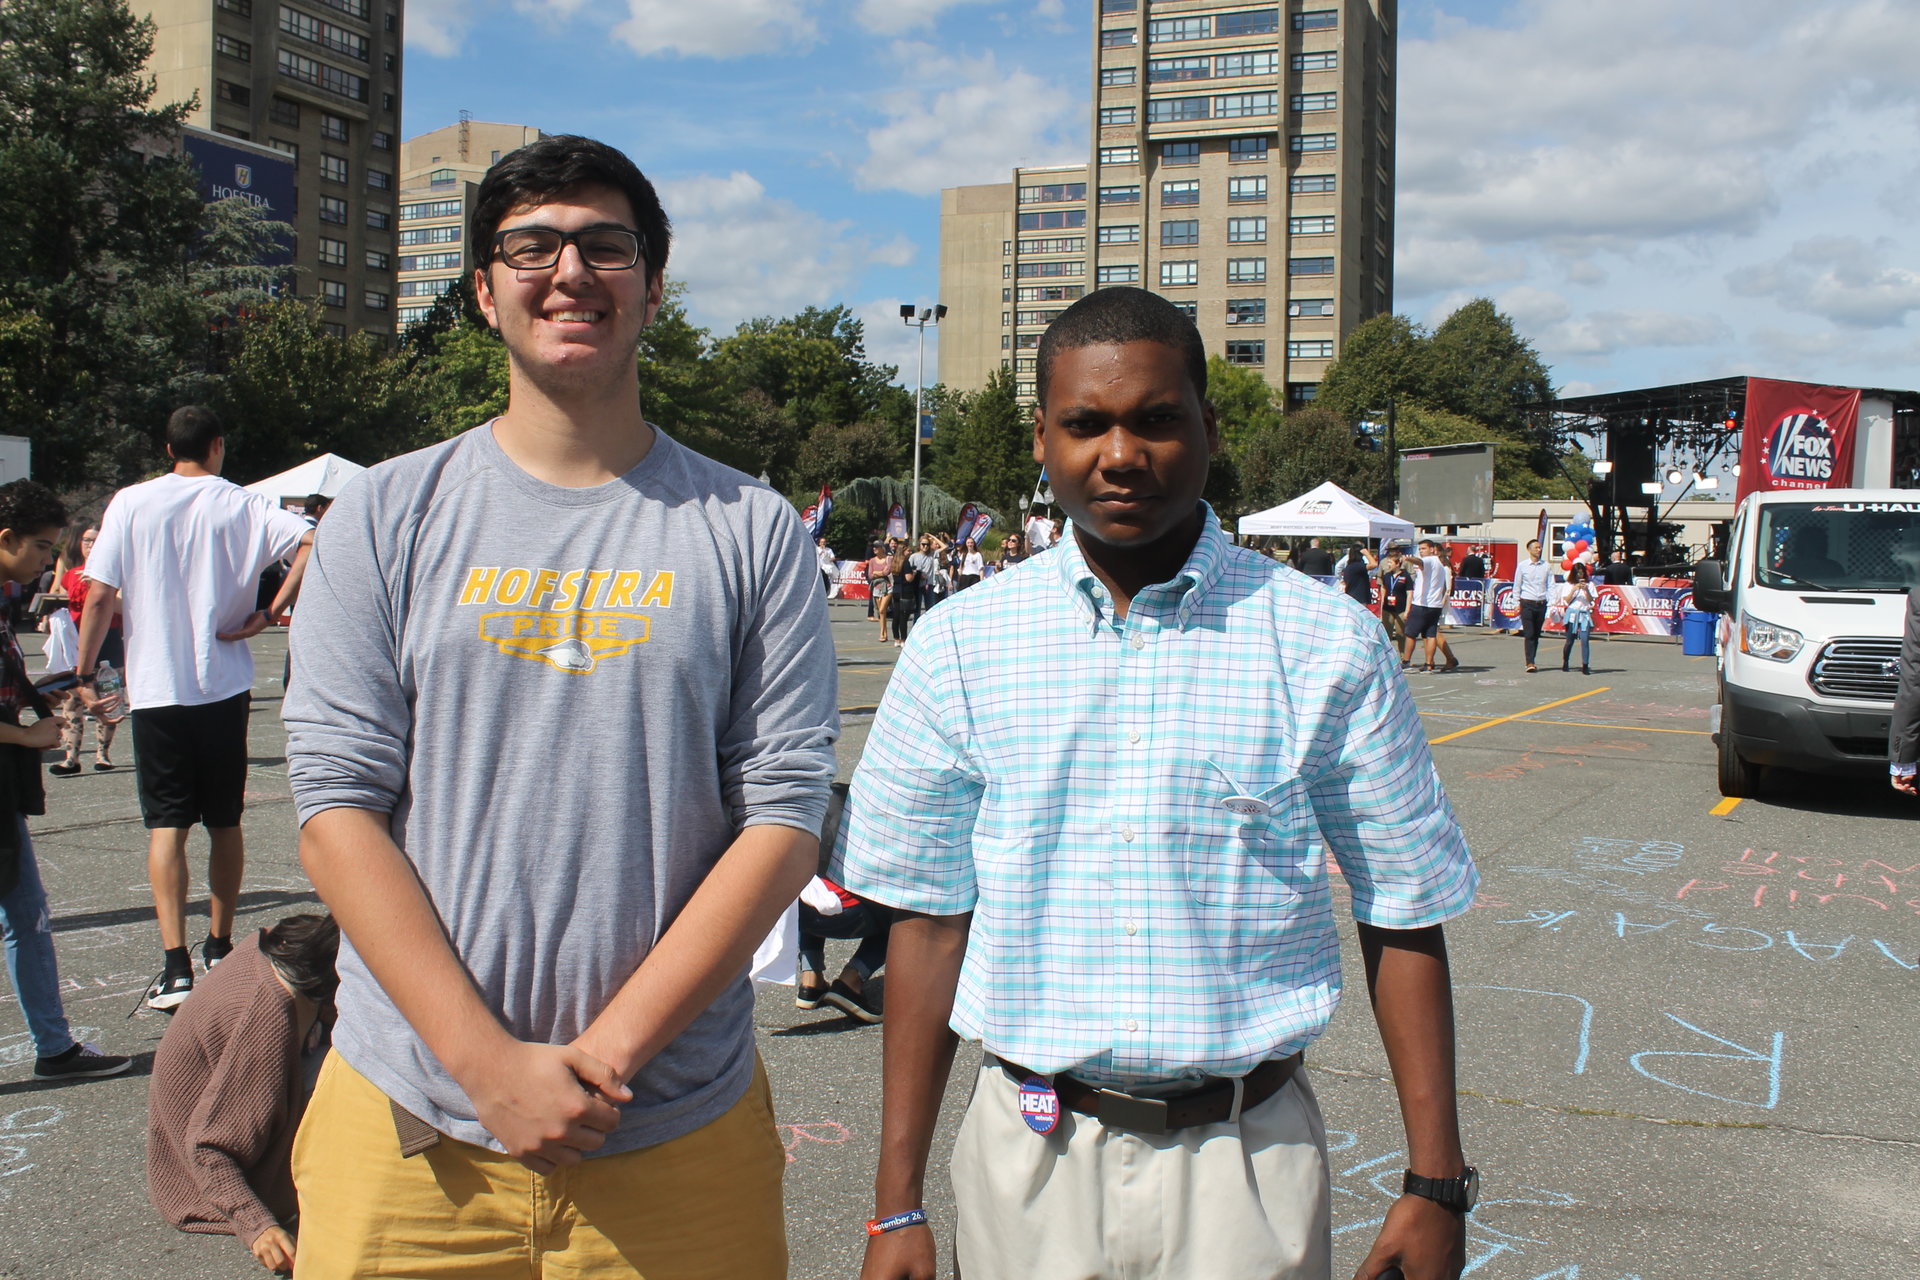 Hofstra students Patrick Foster (left) and Dwight Spencer (right). 